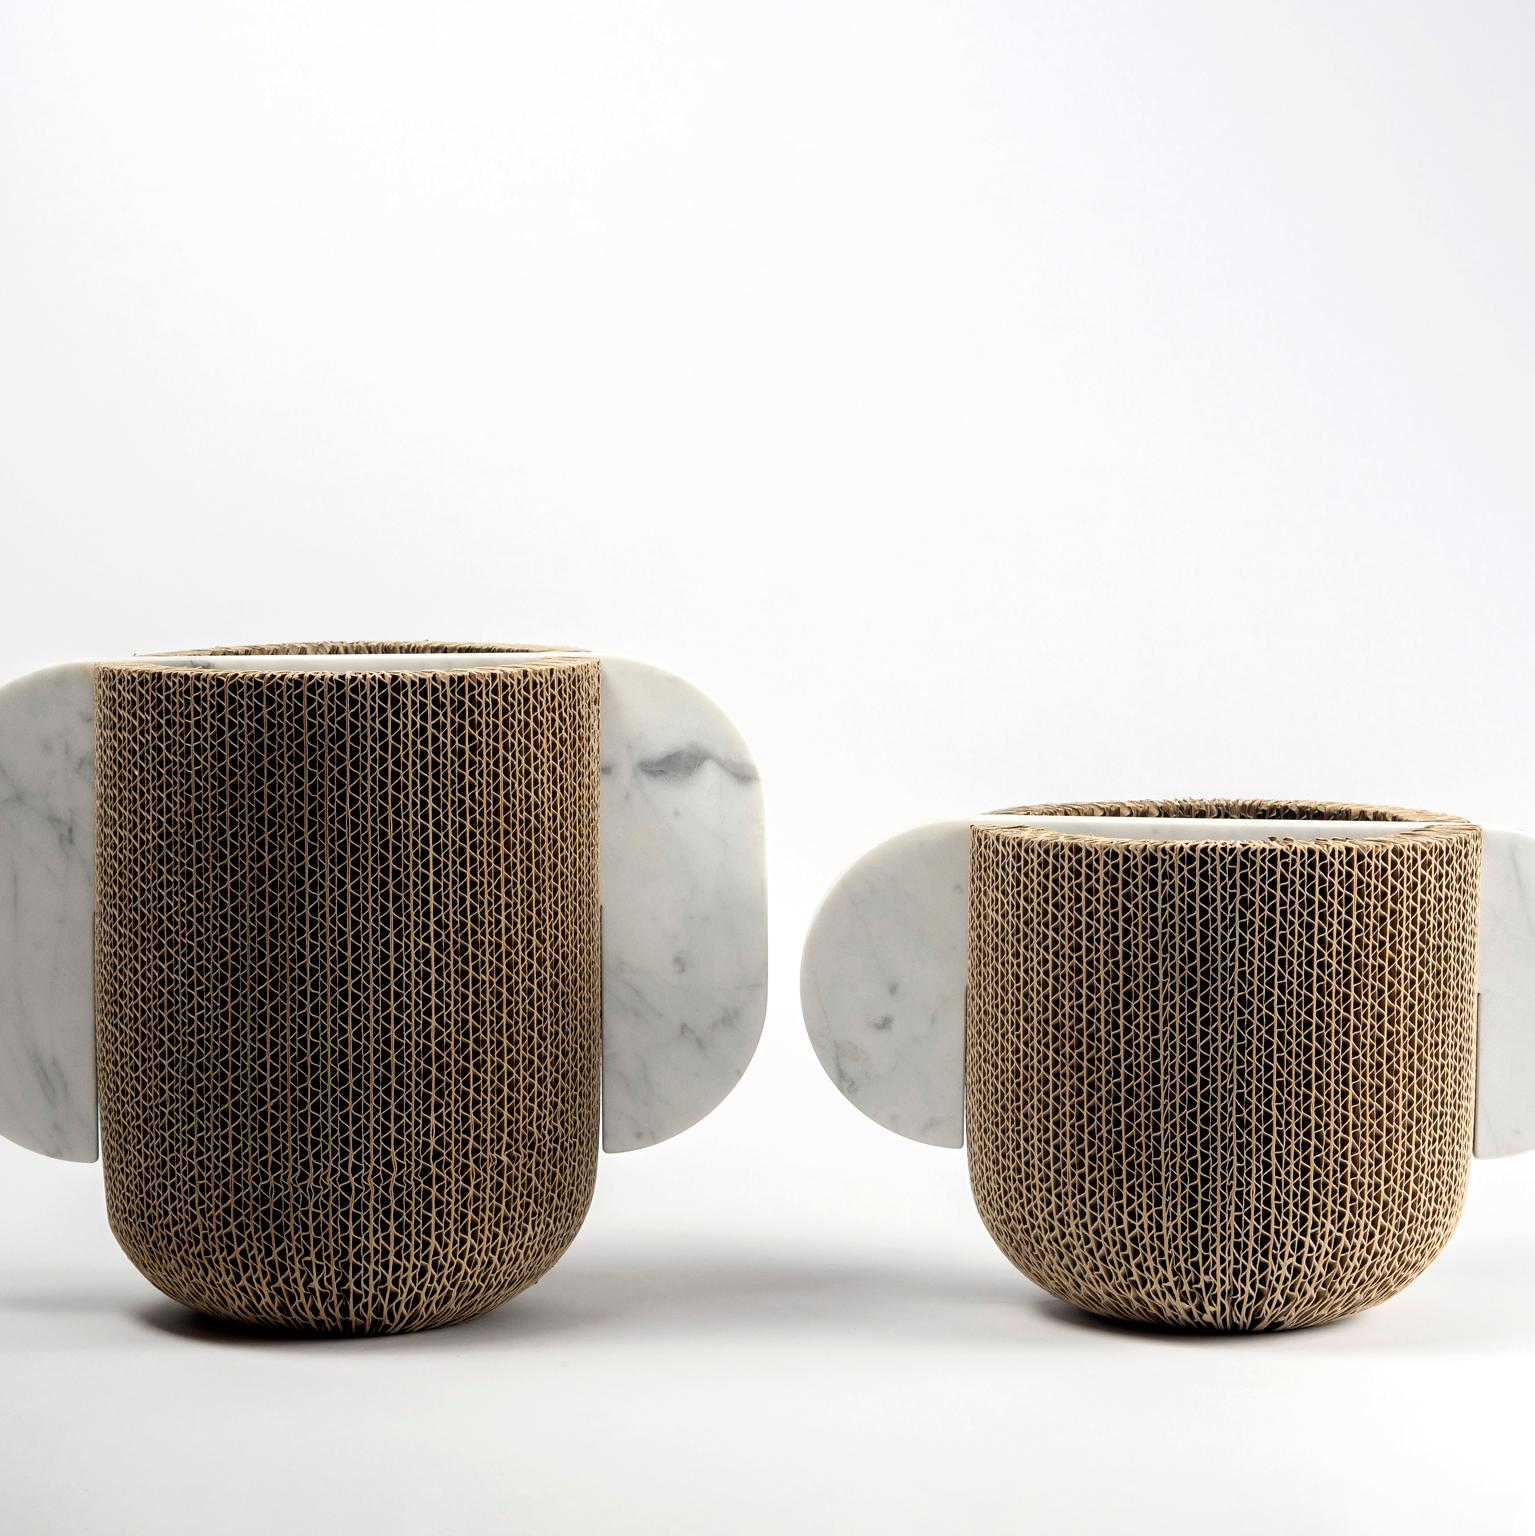 Vases. Material boundaries authenticate each other. Circumscribed forms, complementary to the identity of becoming. A collection of four vases that connect opposing materials: marble and cardboard. Light and heavy, solid and fragile, unalterable and